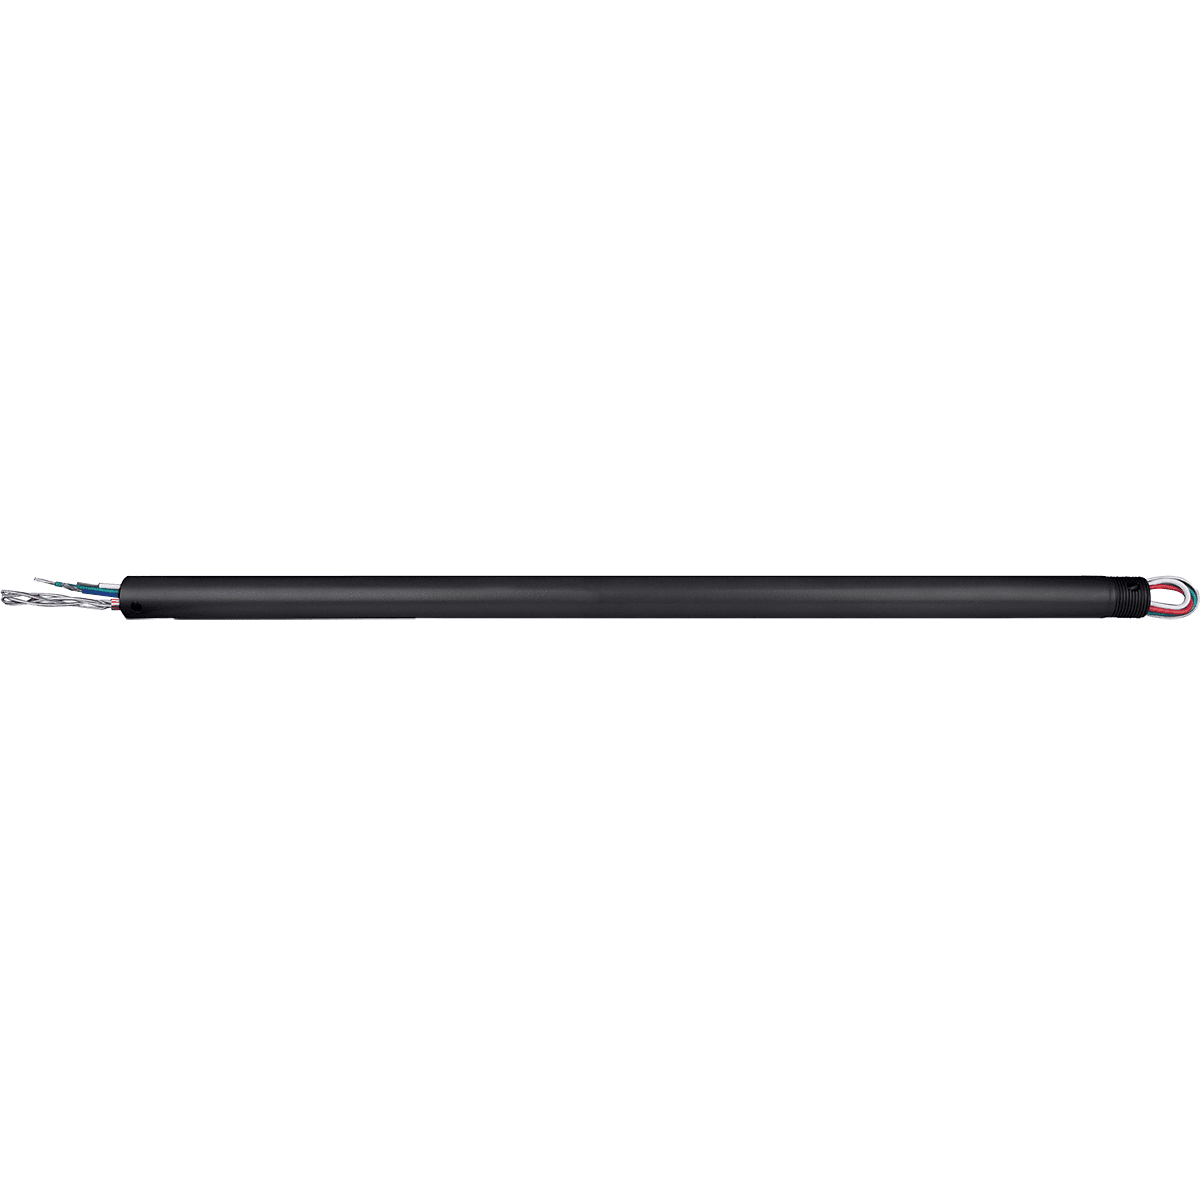 Canarm Optional 24-in Downrod For FANBOS Fans - Black (DR24-CPBK)